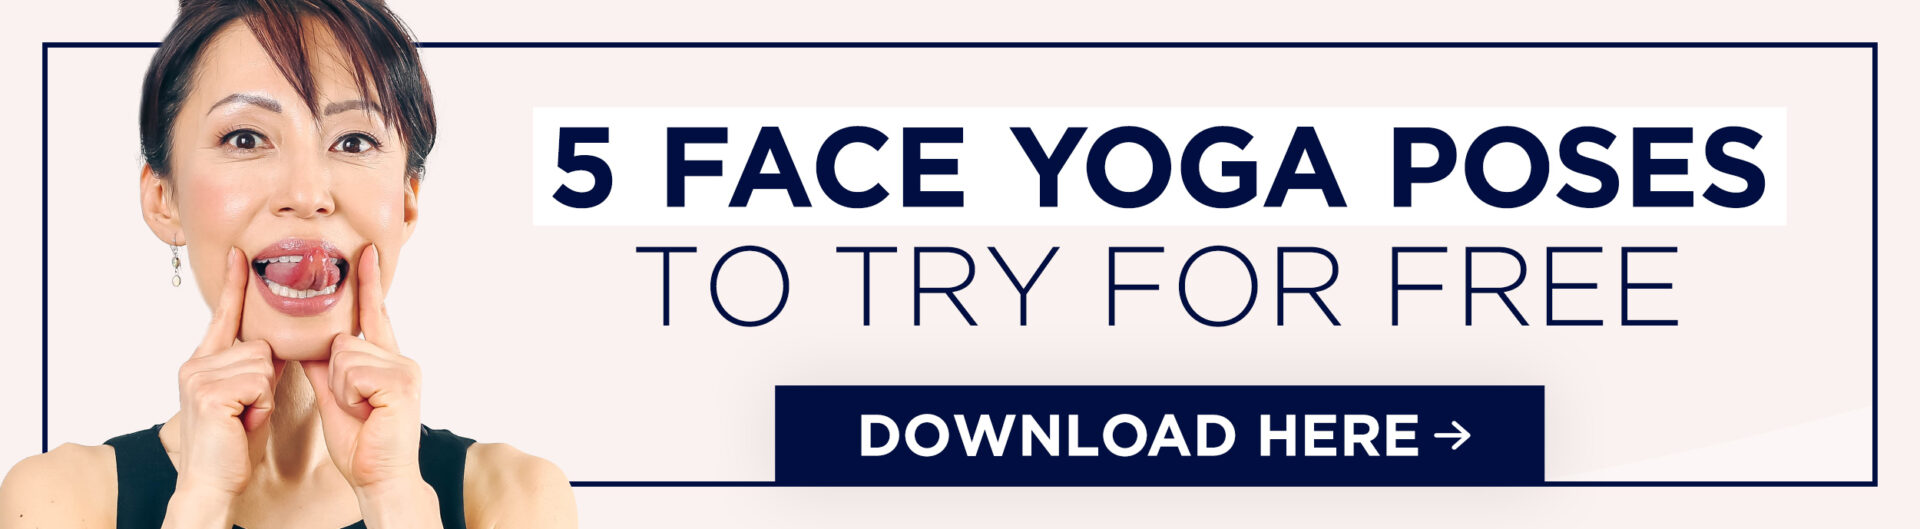 Download Free 5 Face Yoga Poses